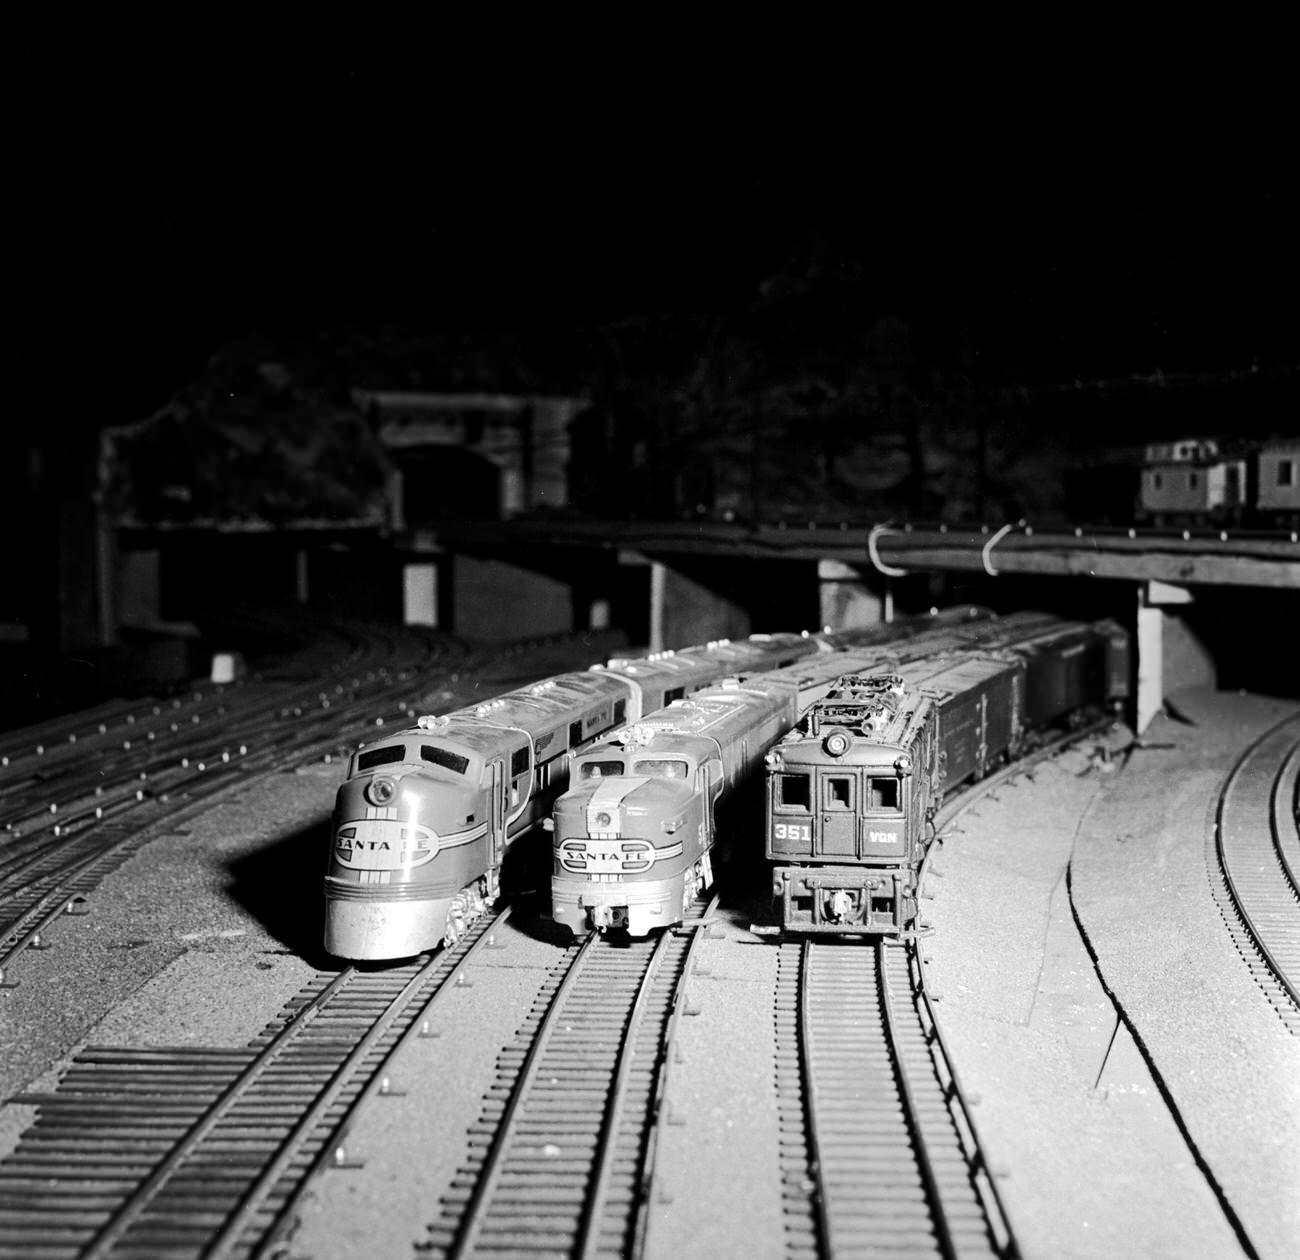 Three realistic miniature trains owned by members of the New York Society Of Model Engineers line up on the track.